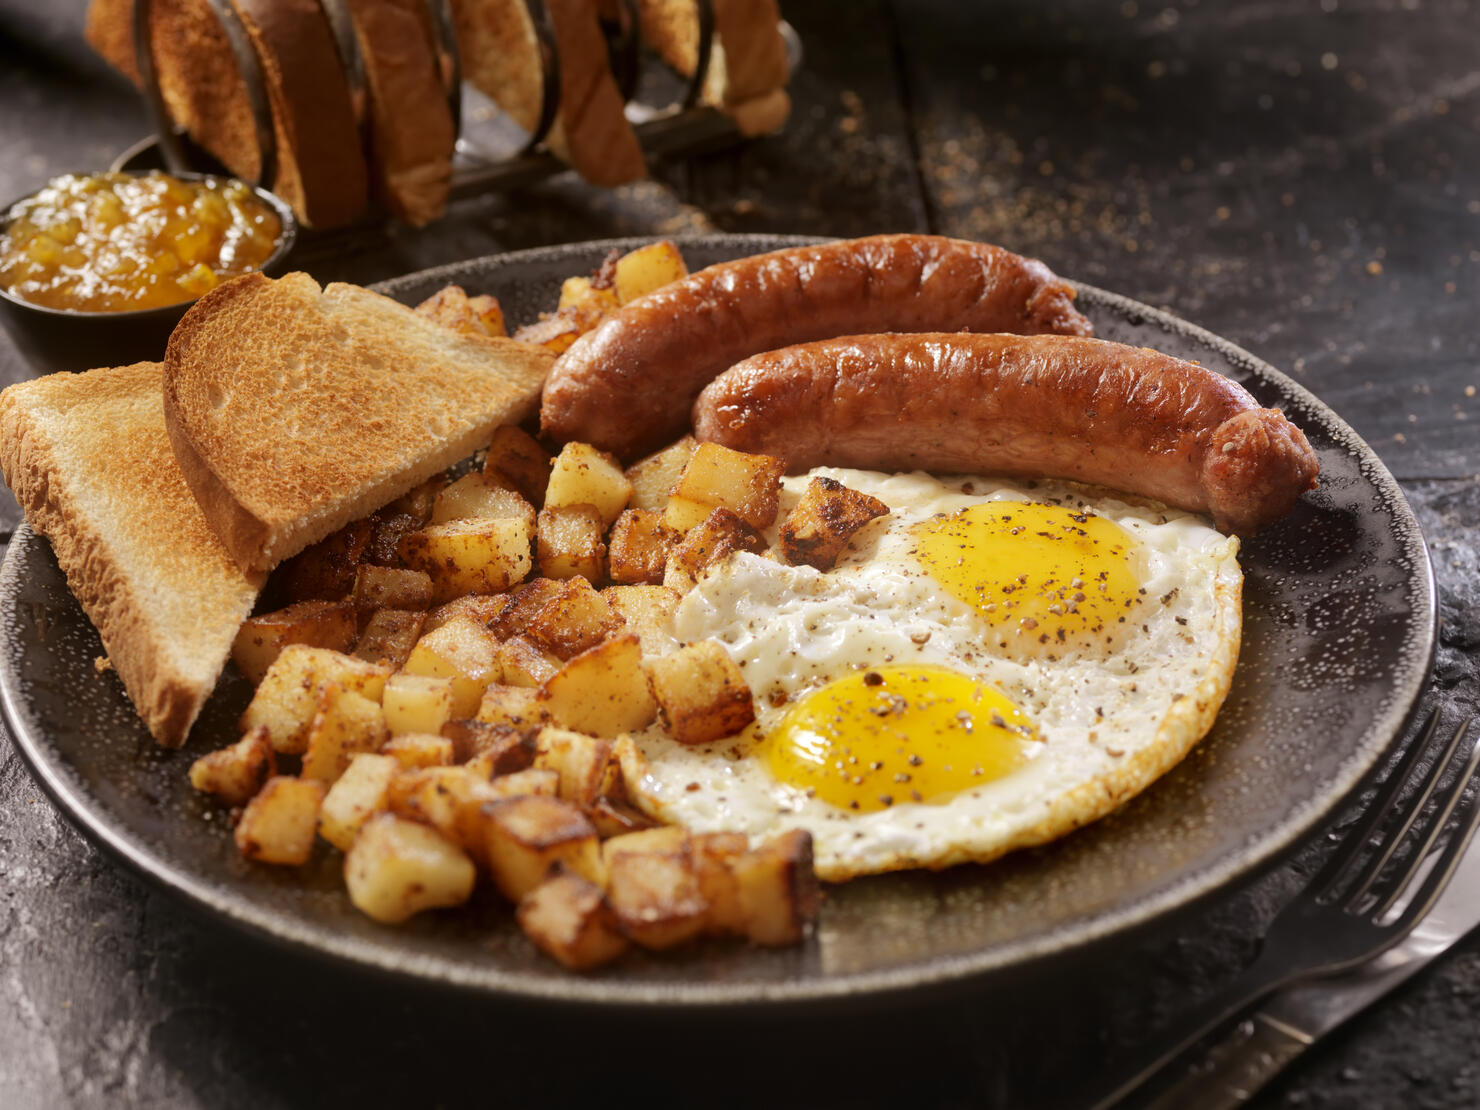 Breakfast with Sunny side up eggs and Sausage